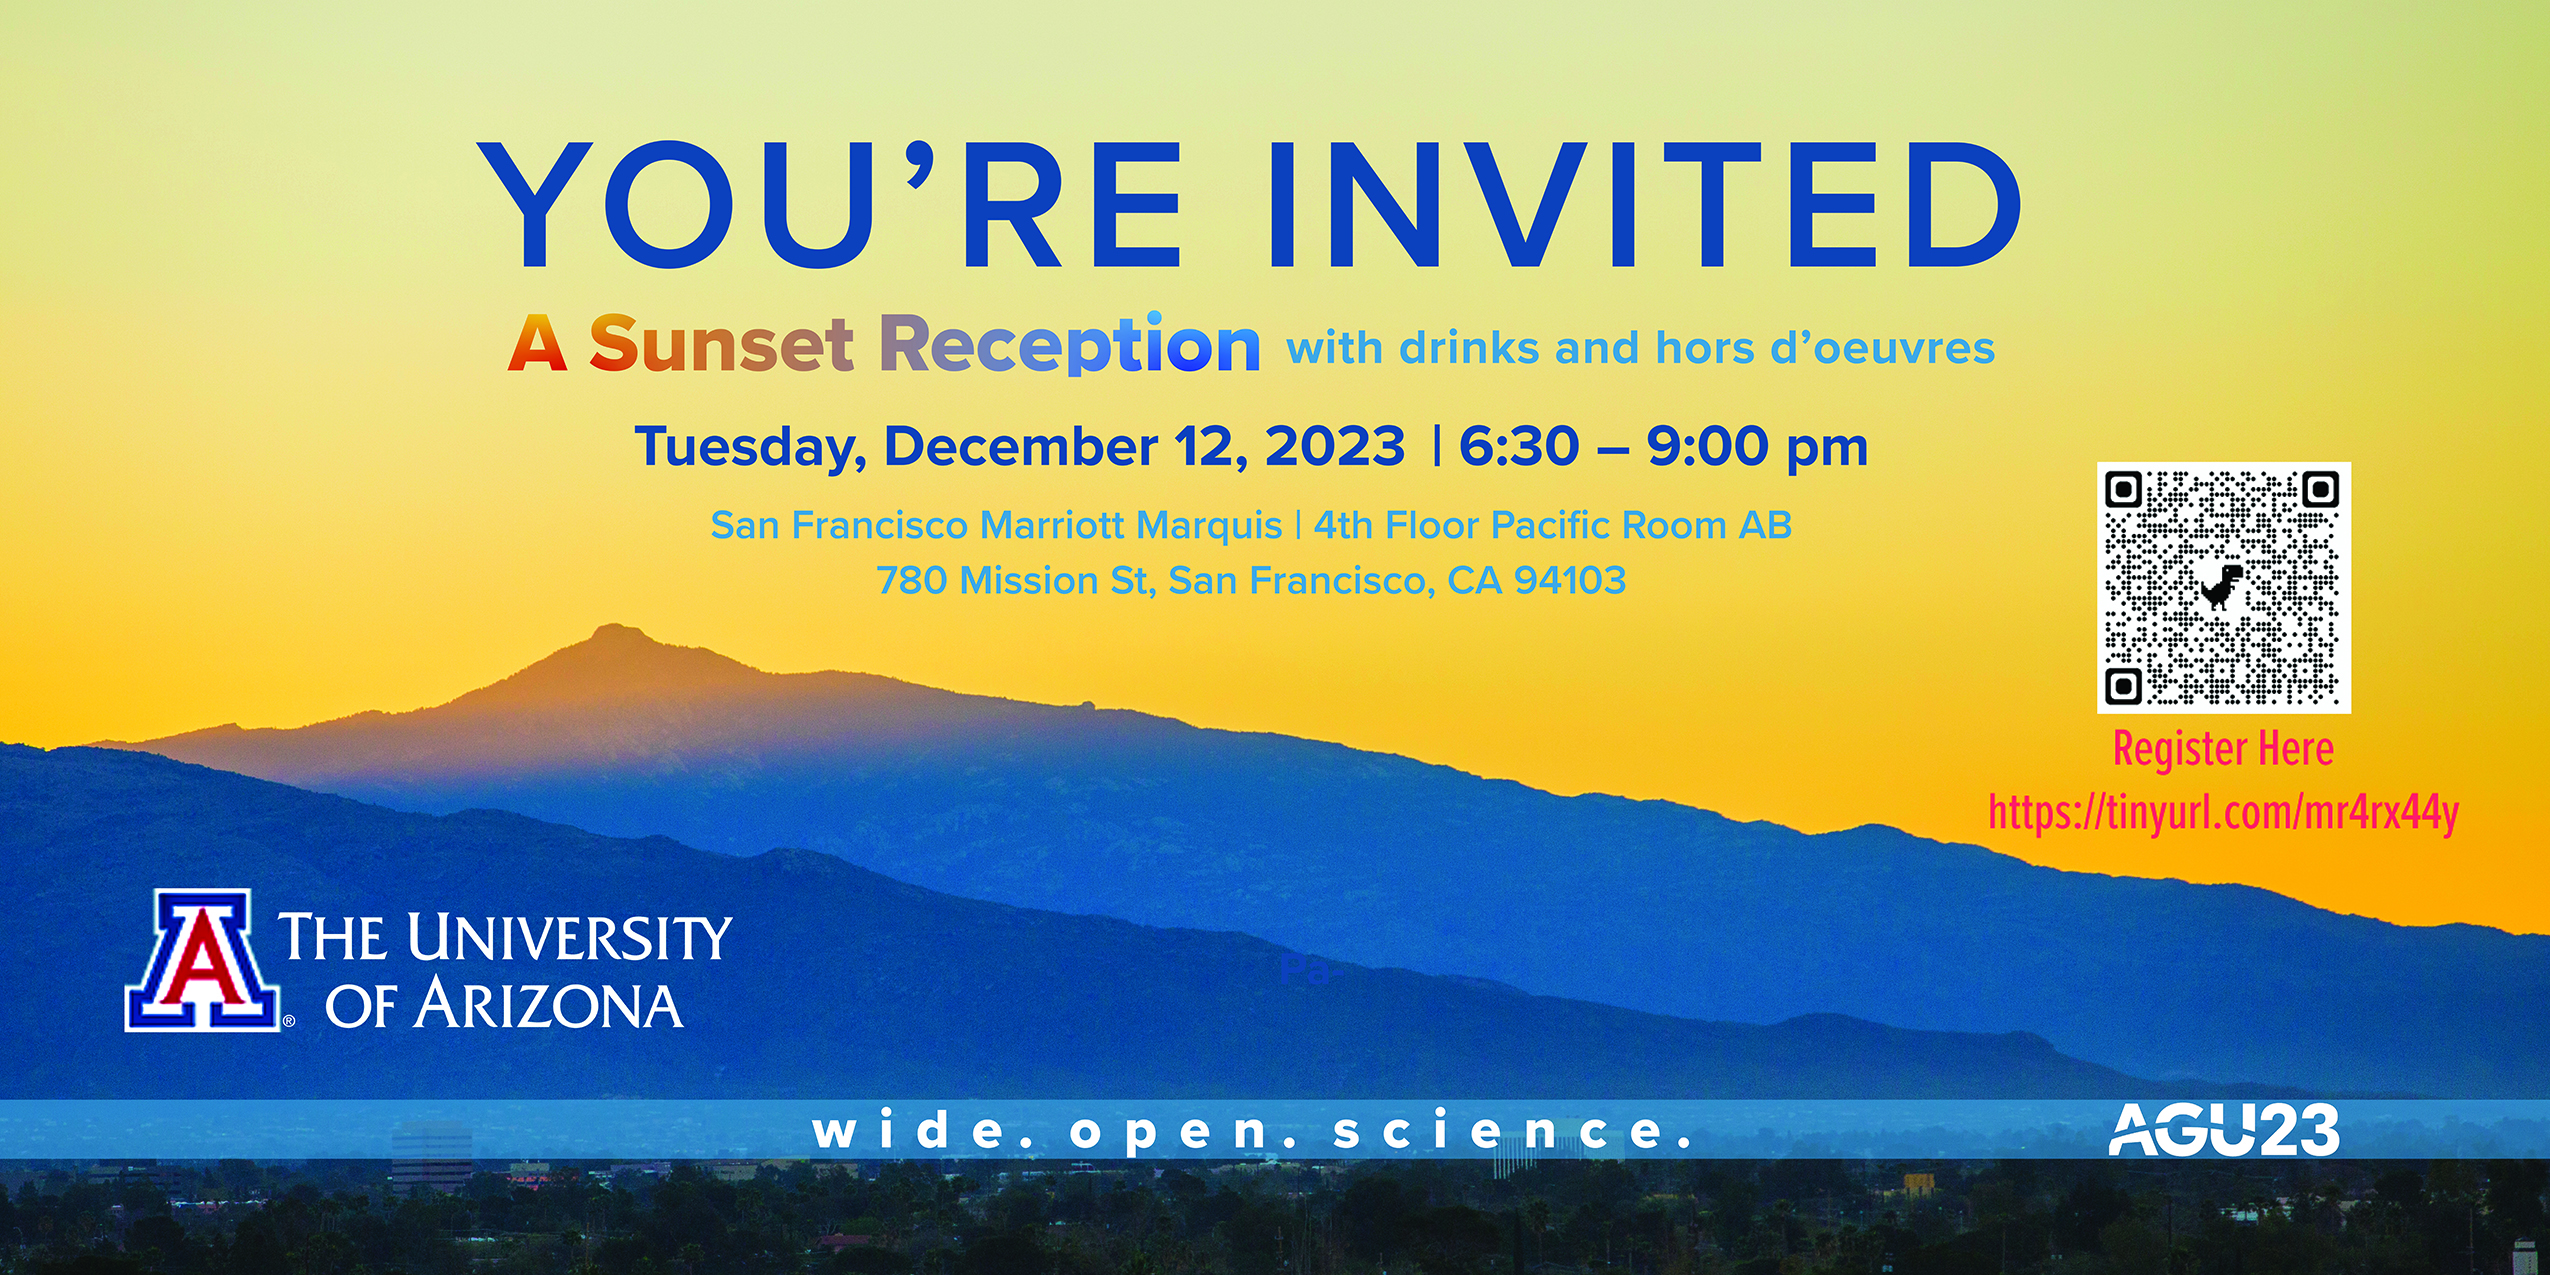 An invitation to a sunset reception with drinks and hors d’oeuvres at the AGU conference.